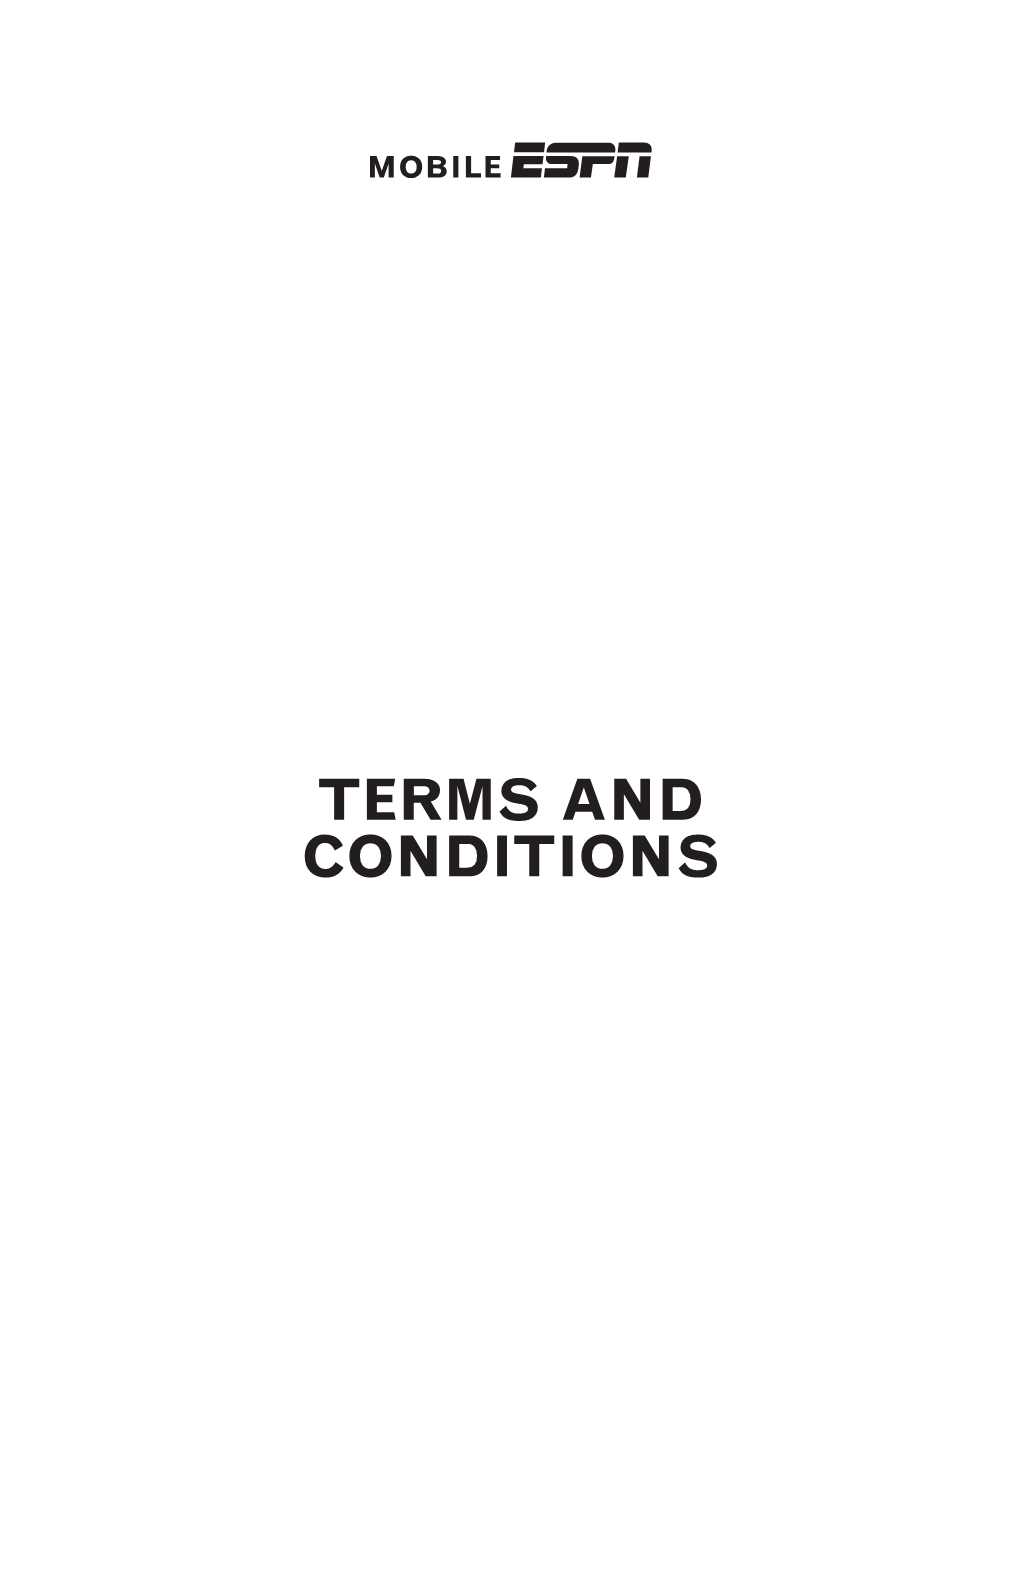 TERMS and CONDITIONS Mobile ESPN Term and Conditions of Service